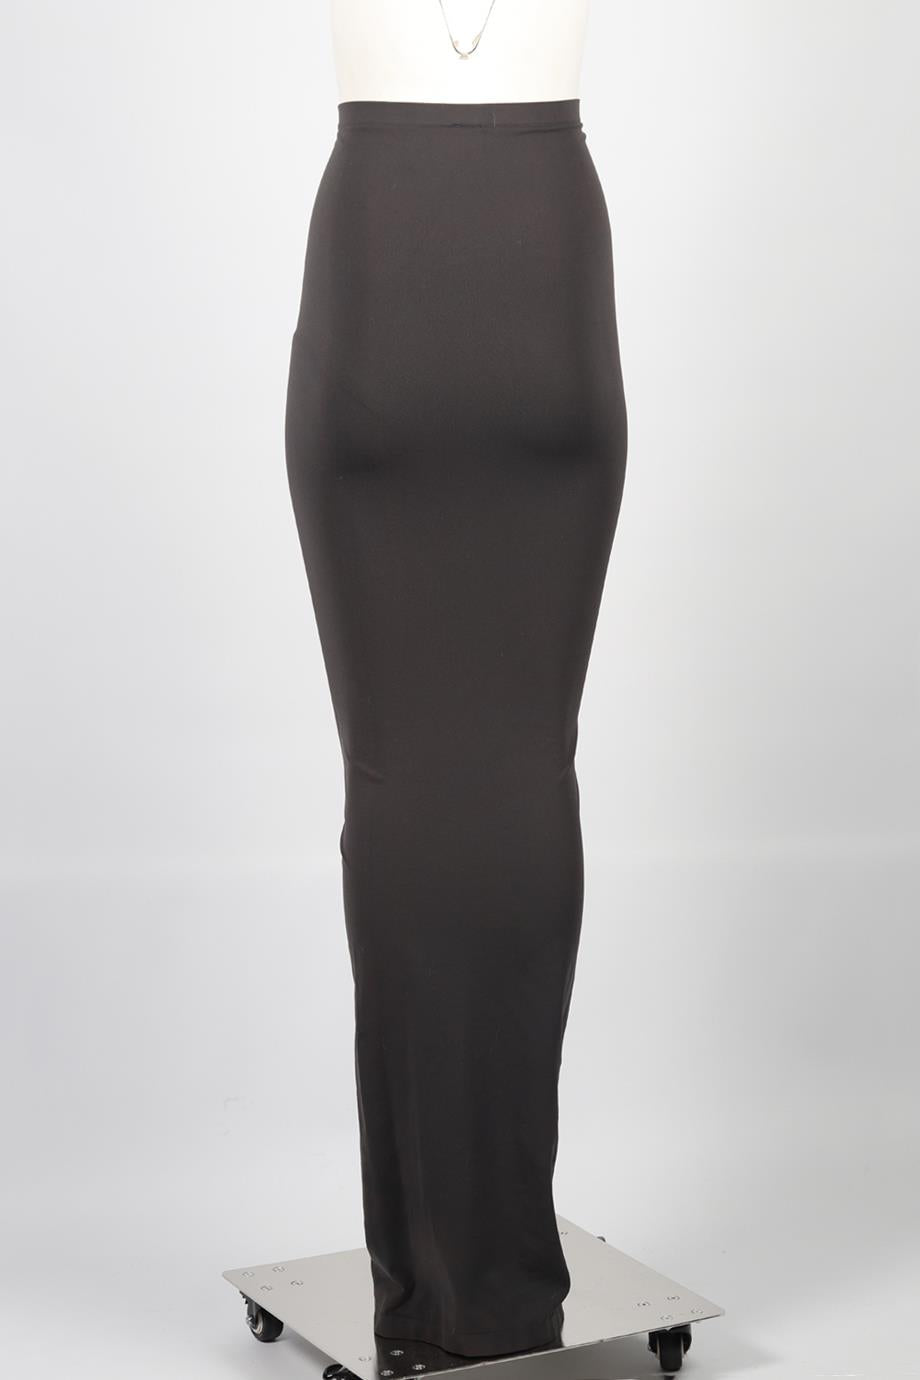 WOLFORD JERSEY MAXI SKIRT SMALL